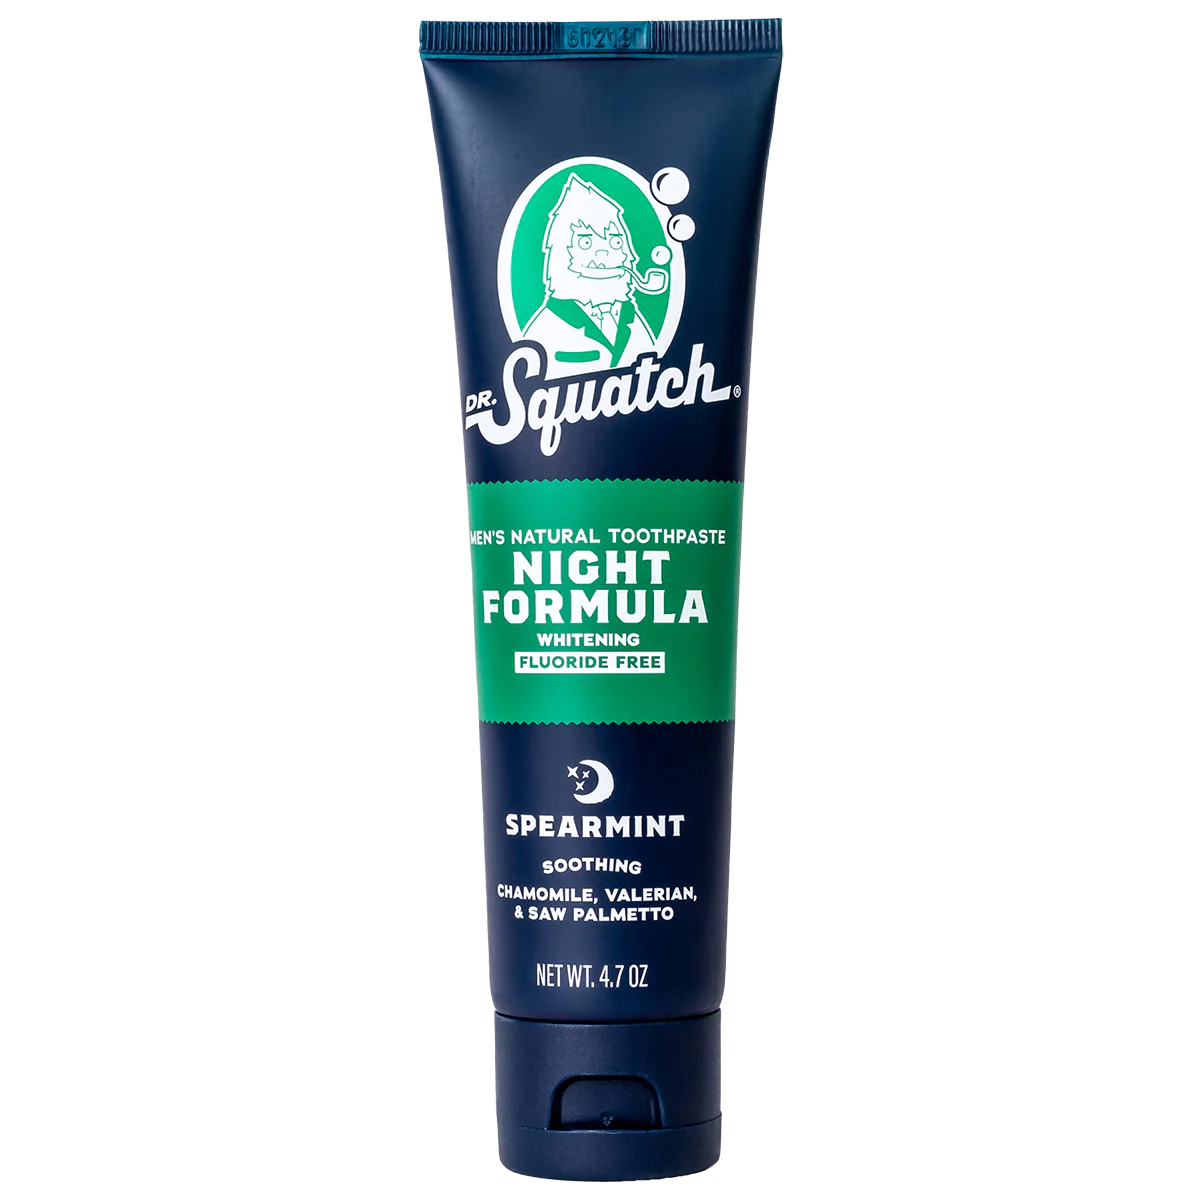 Night Formula toothpaste | Dr. Squatch